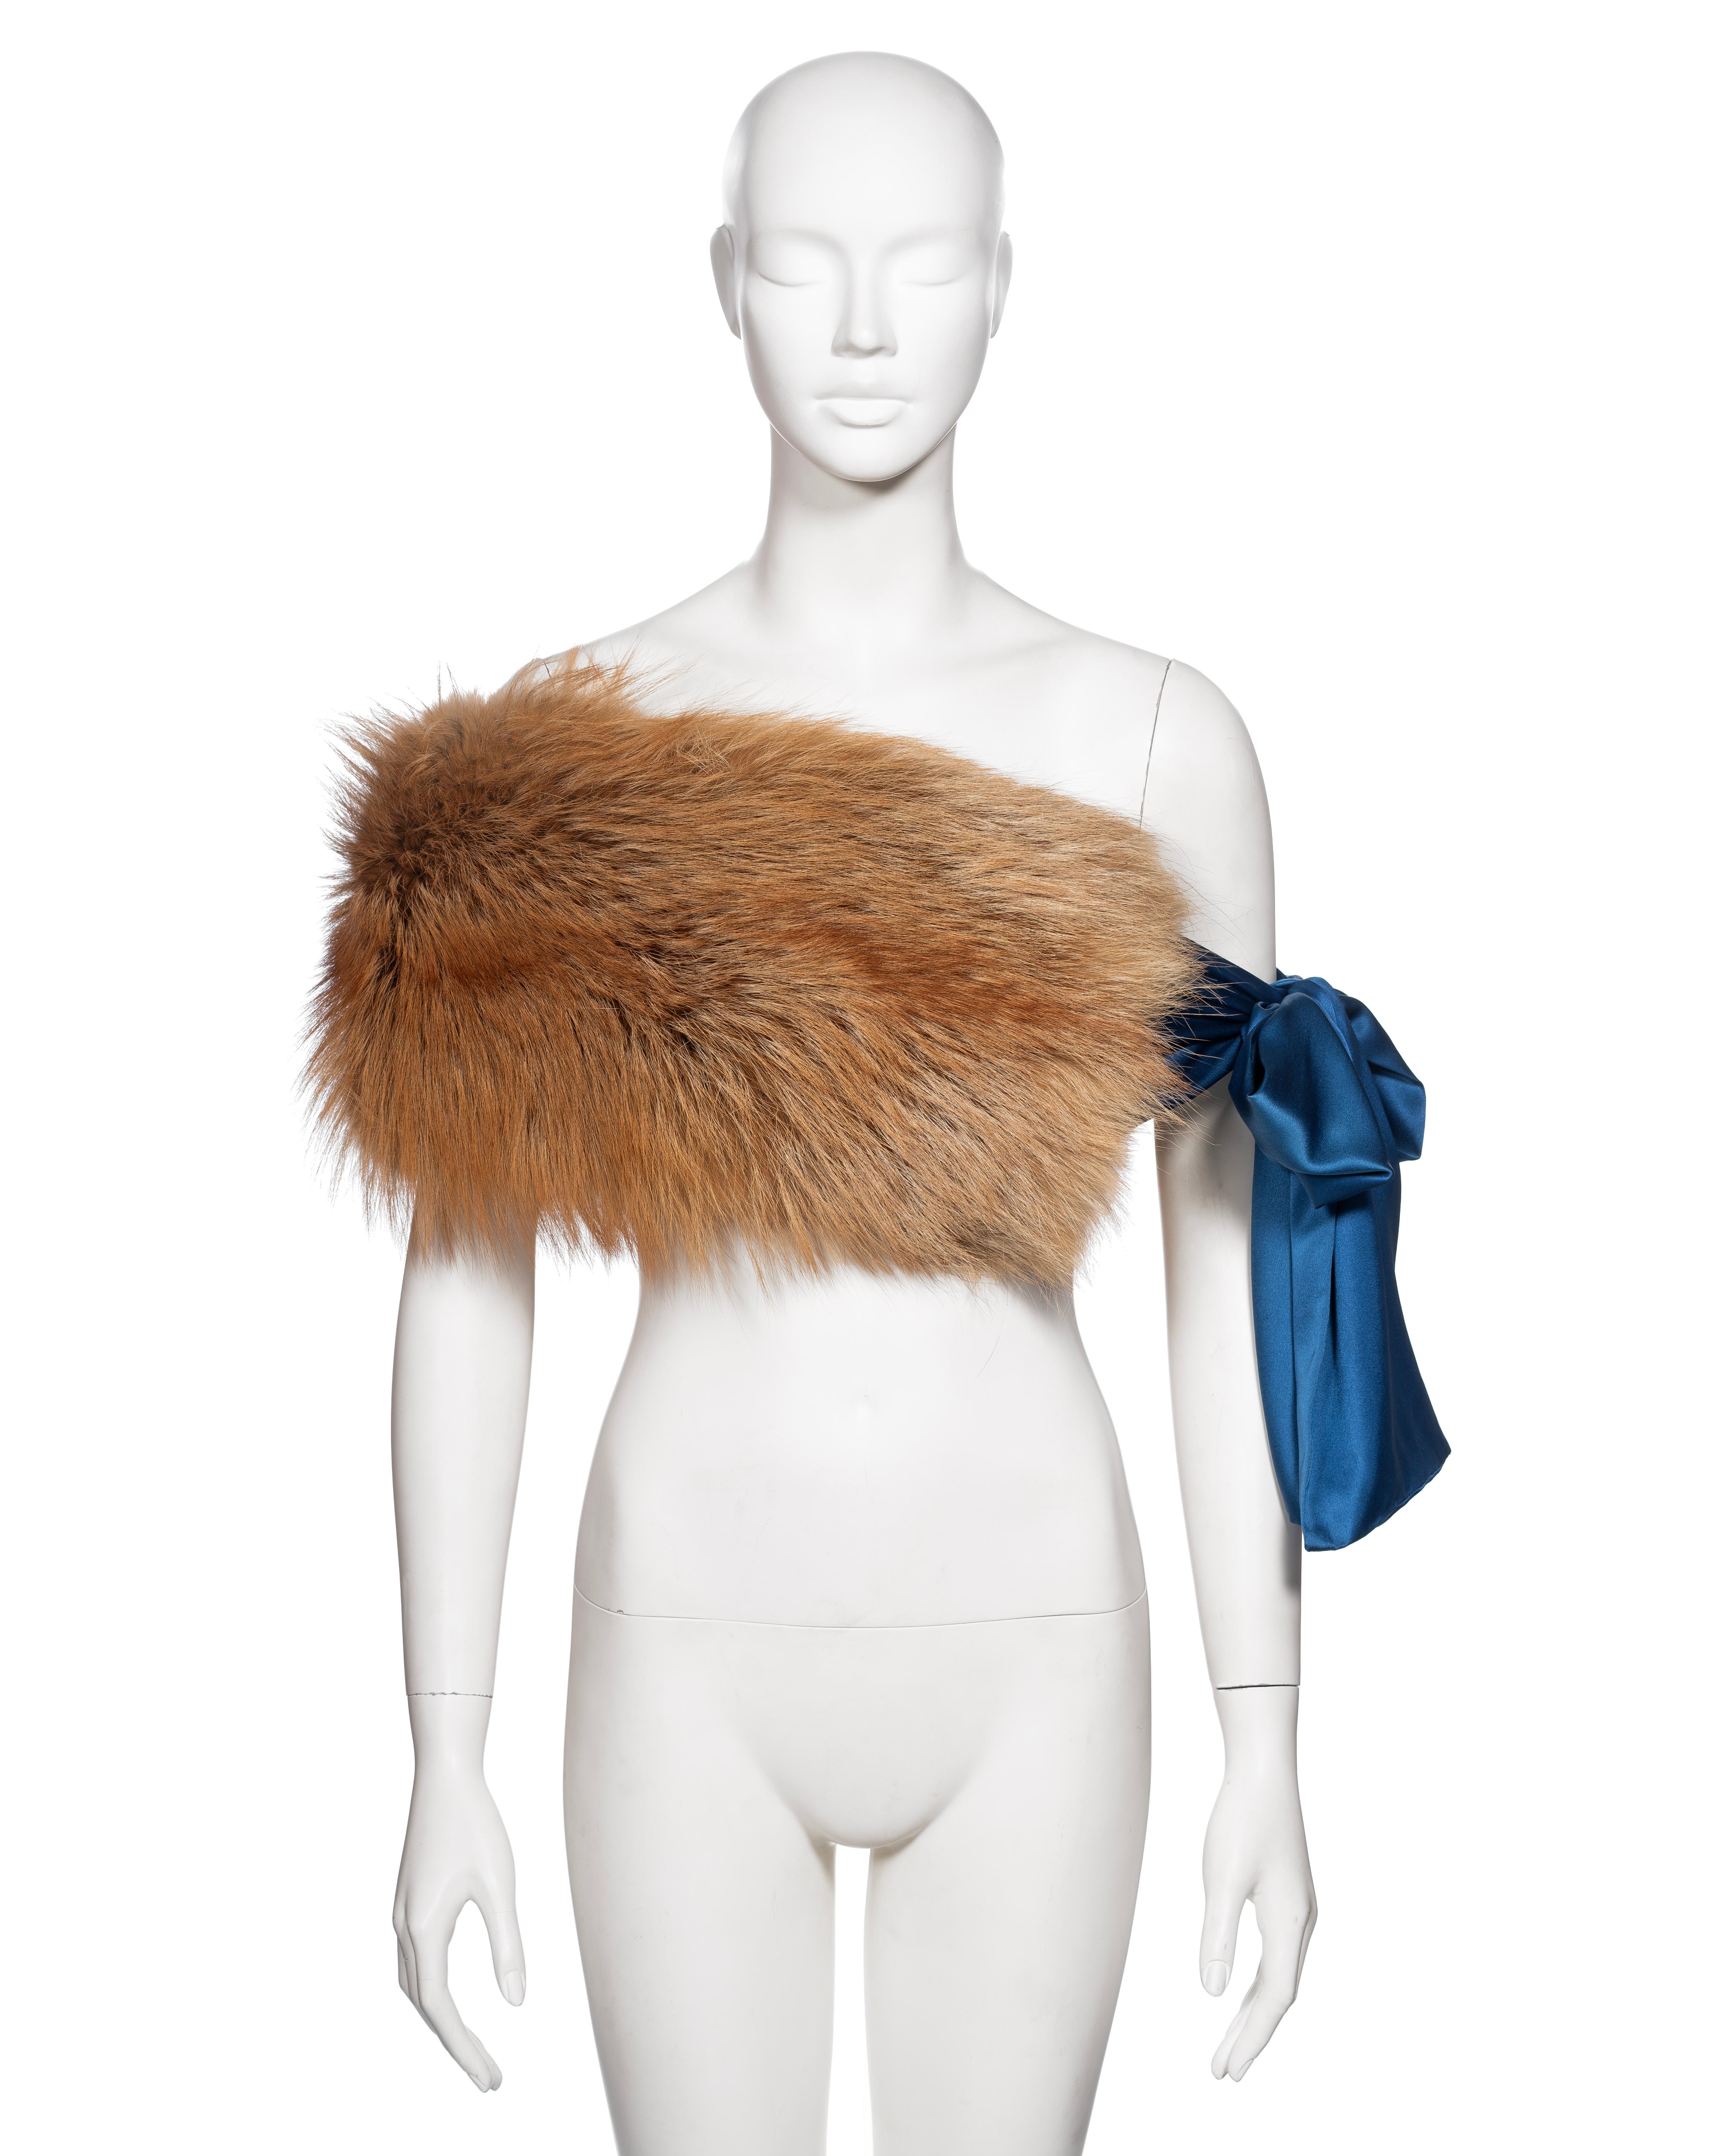 ▪ Archival Yves Saint Laurent Runway Stole
▪ Creative Director: Tom Ford
▪ Fall-Winter 2003
▪ Sold by One of a Kind Archive
▪ Luxurious golden fox fur
▪ Versatile blue silk ties allow for various styling options
▪ Featured on the runway and in the